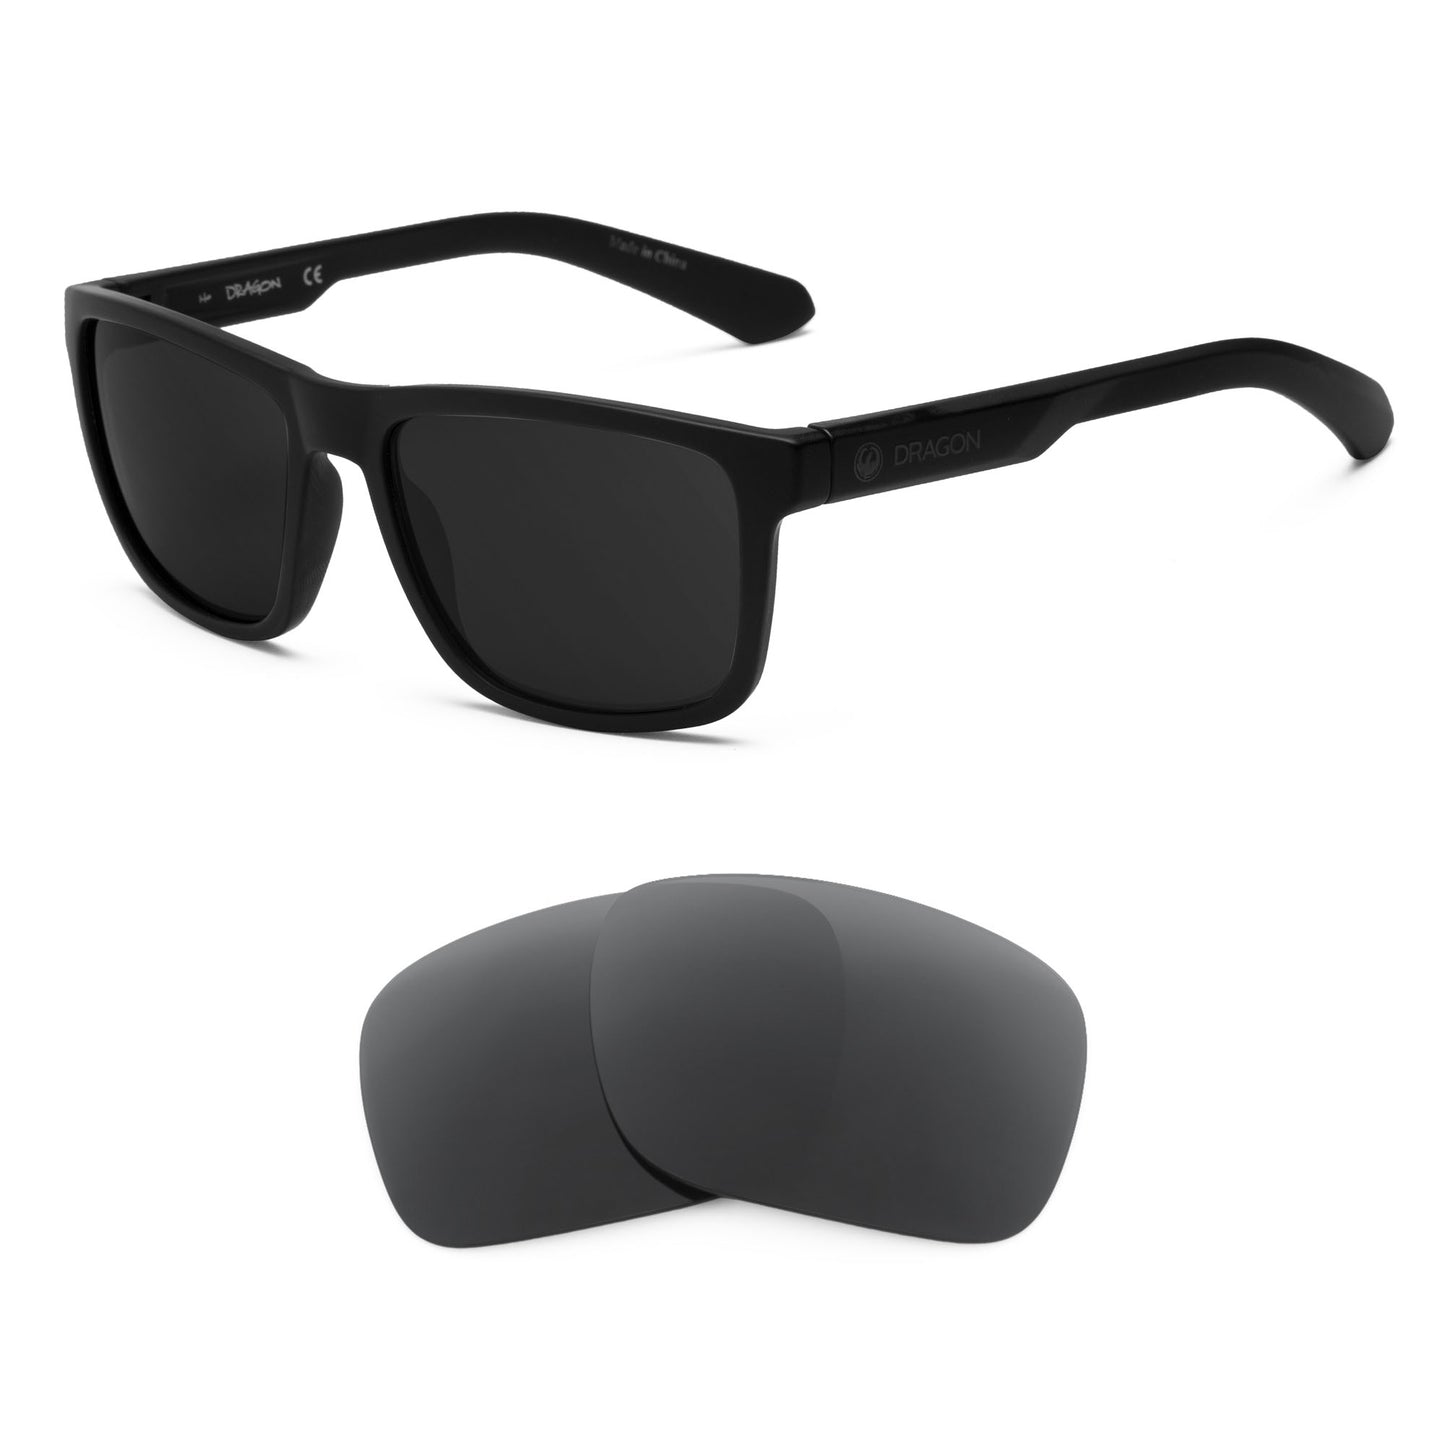 Dragon Reed sunglasses with replacement lenses